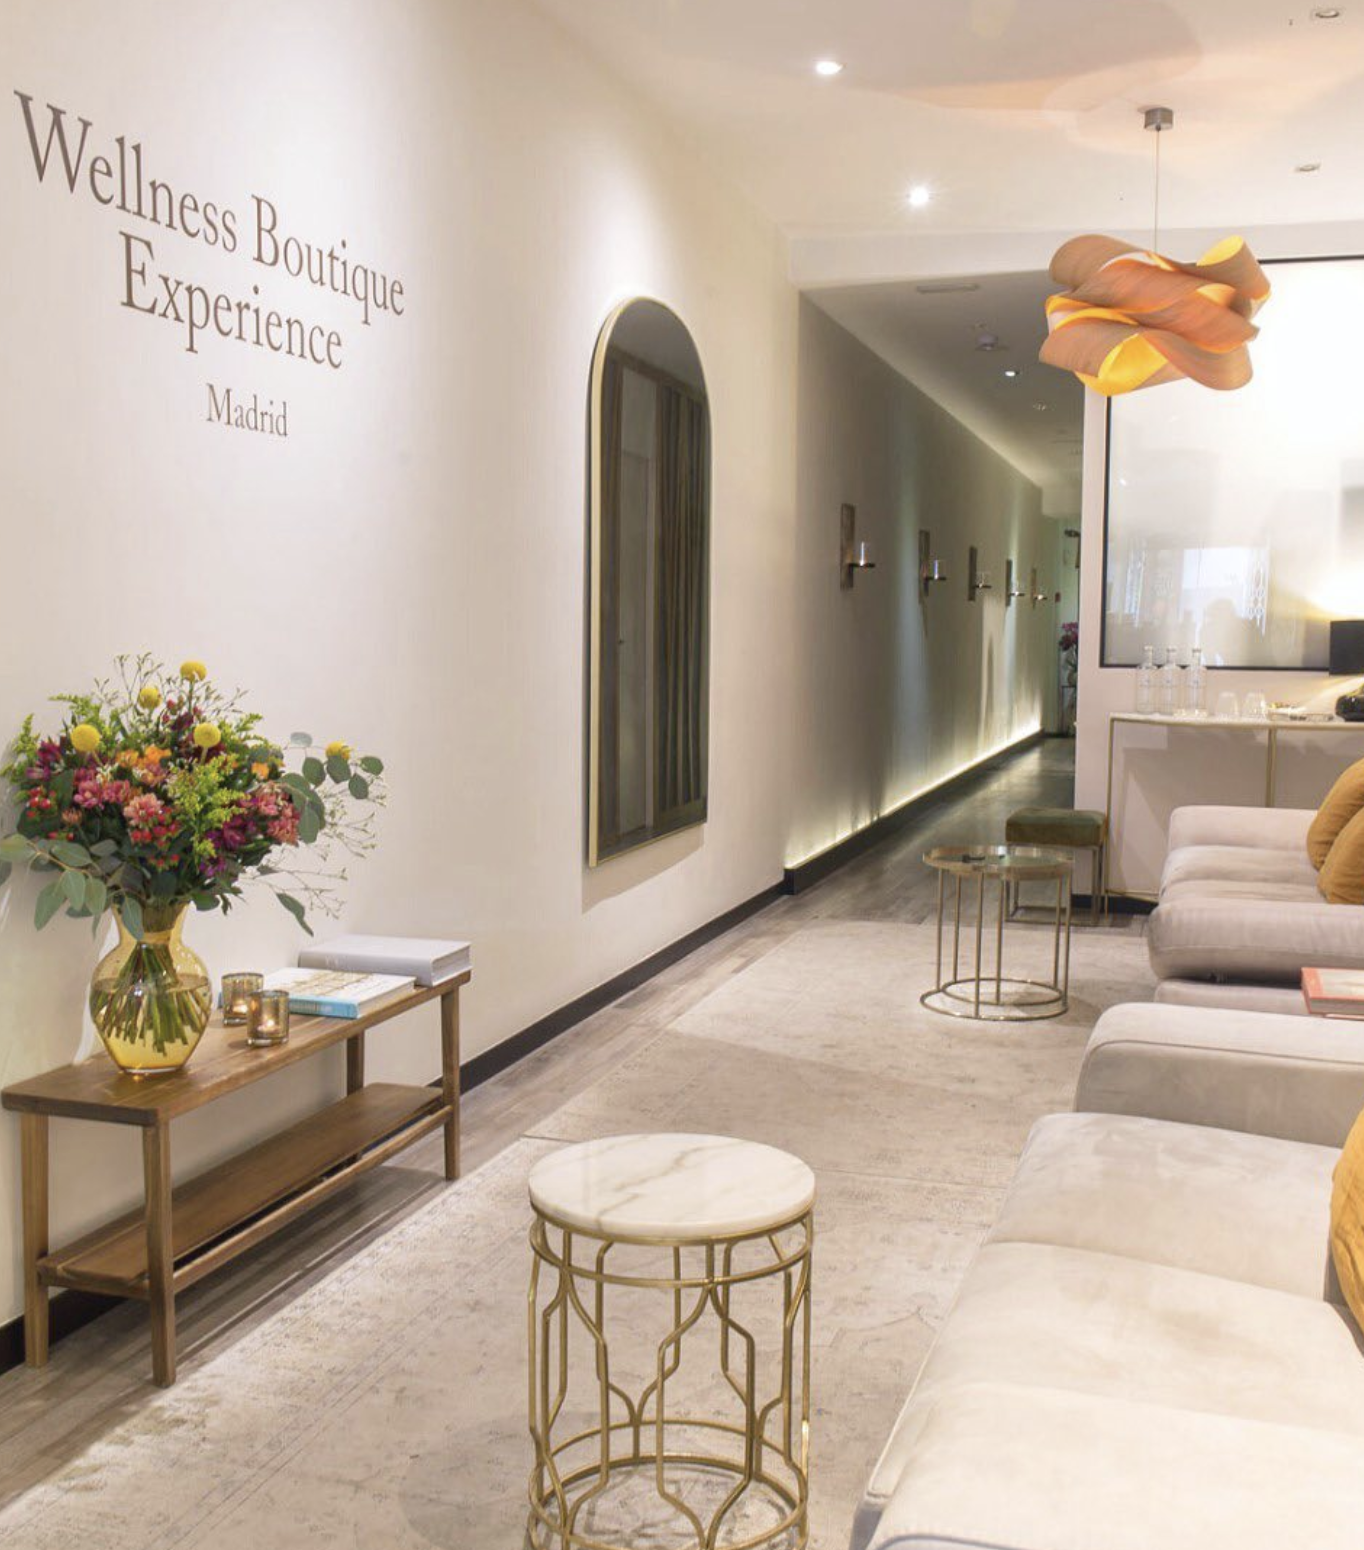 Wellness Boutique Experience